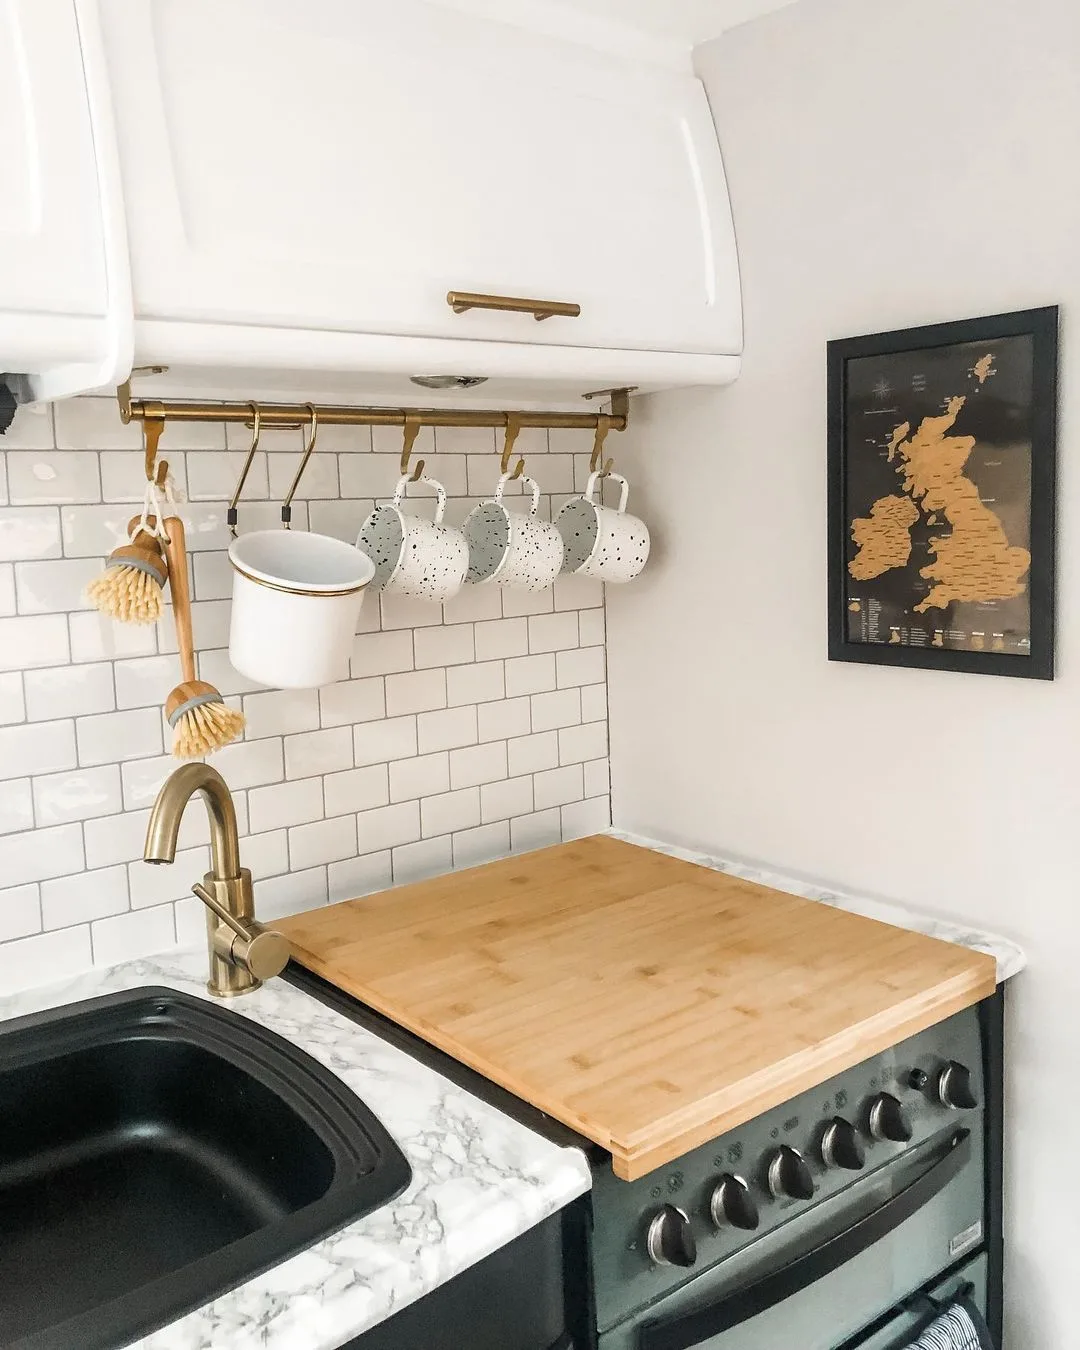 Caravan kitchen with a butchers block cover on the stove top.